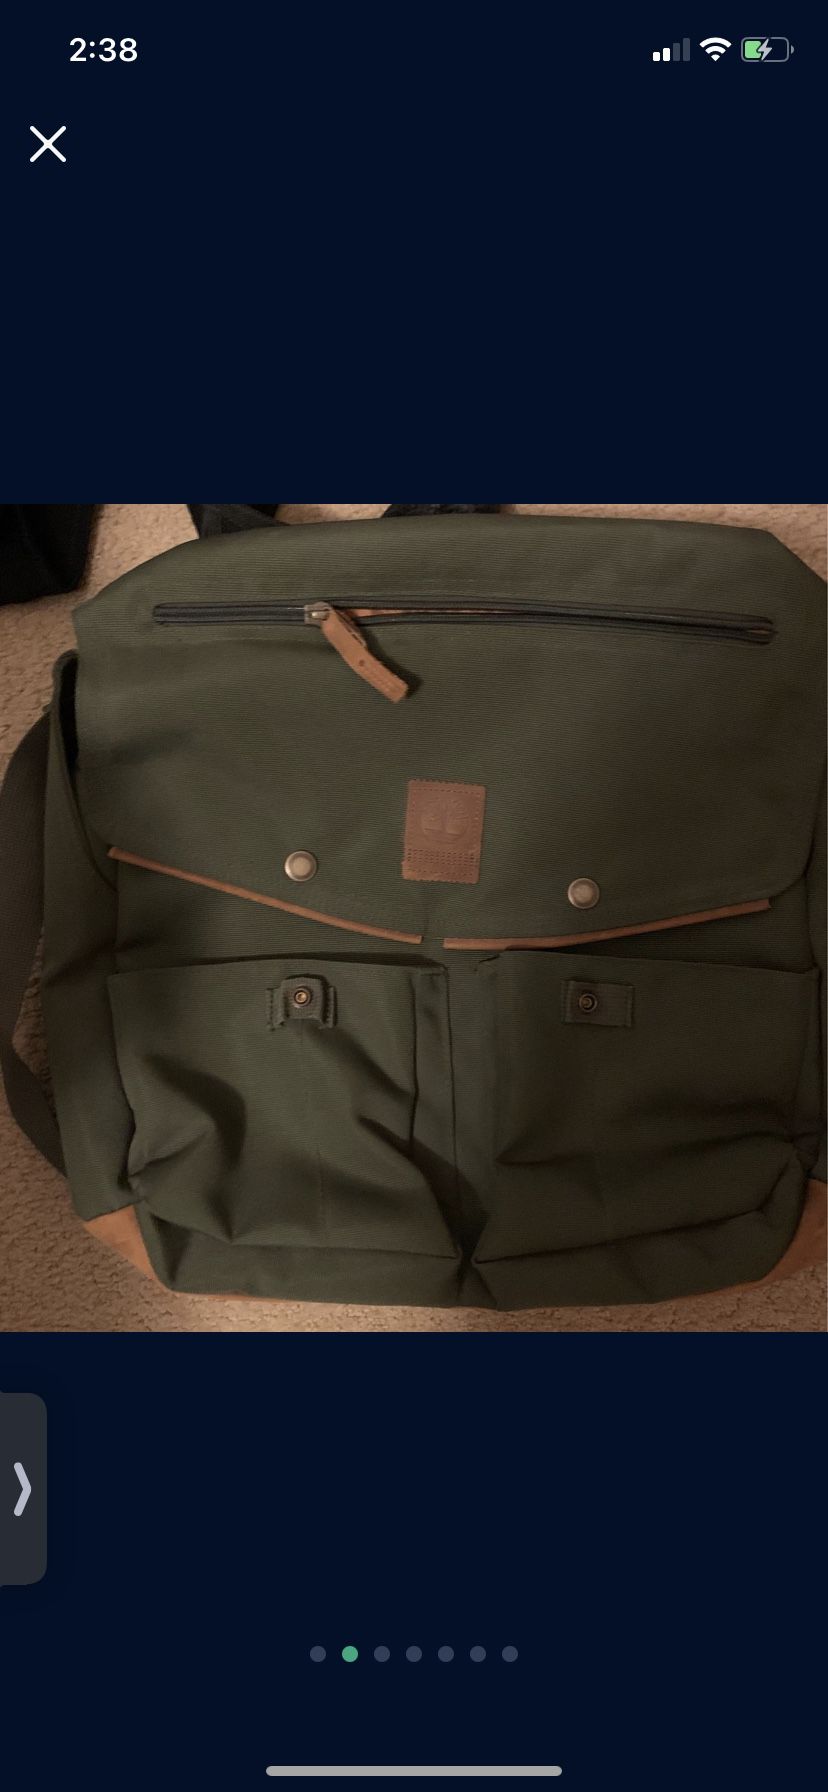 Assorted Mint Condition Backpacks / Backpack Coolers   Open To Offers  Discount For The Lot 